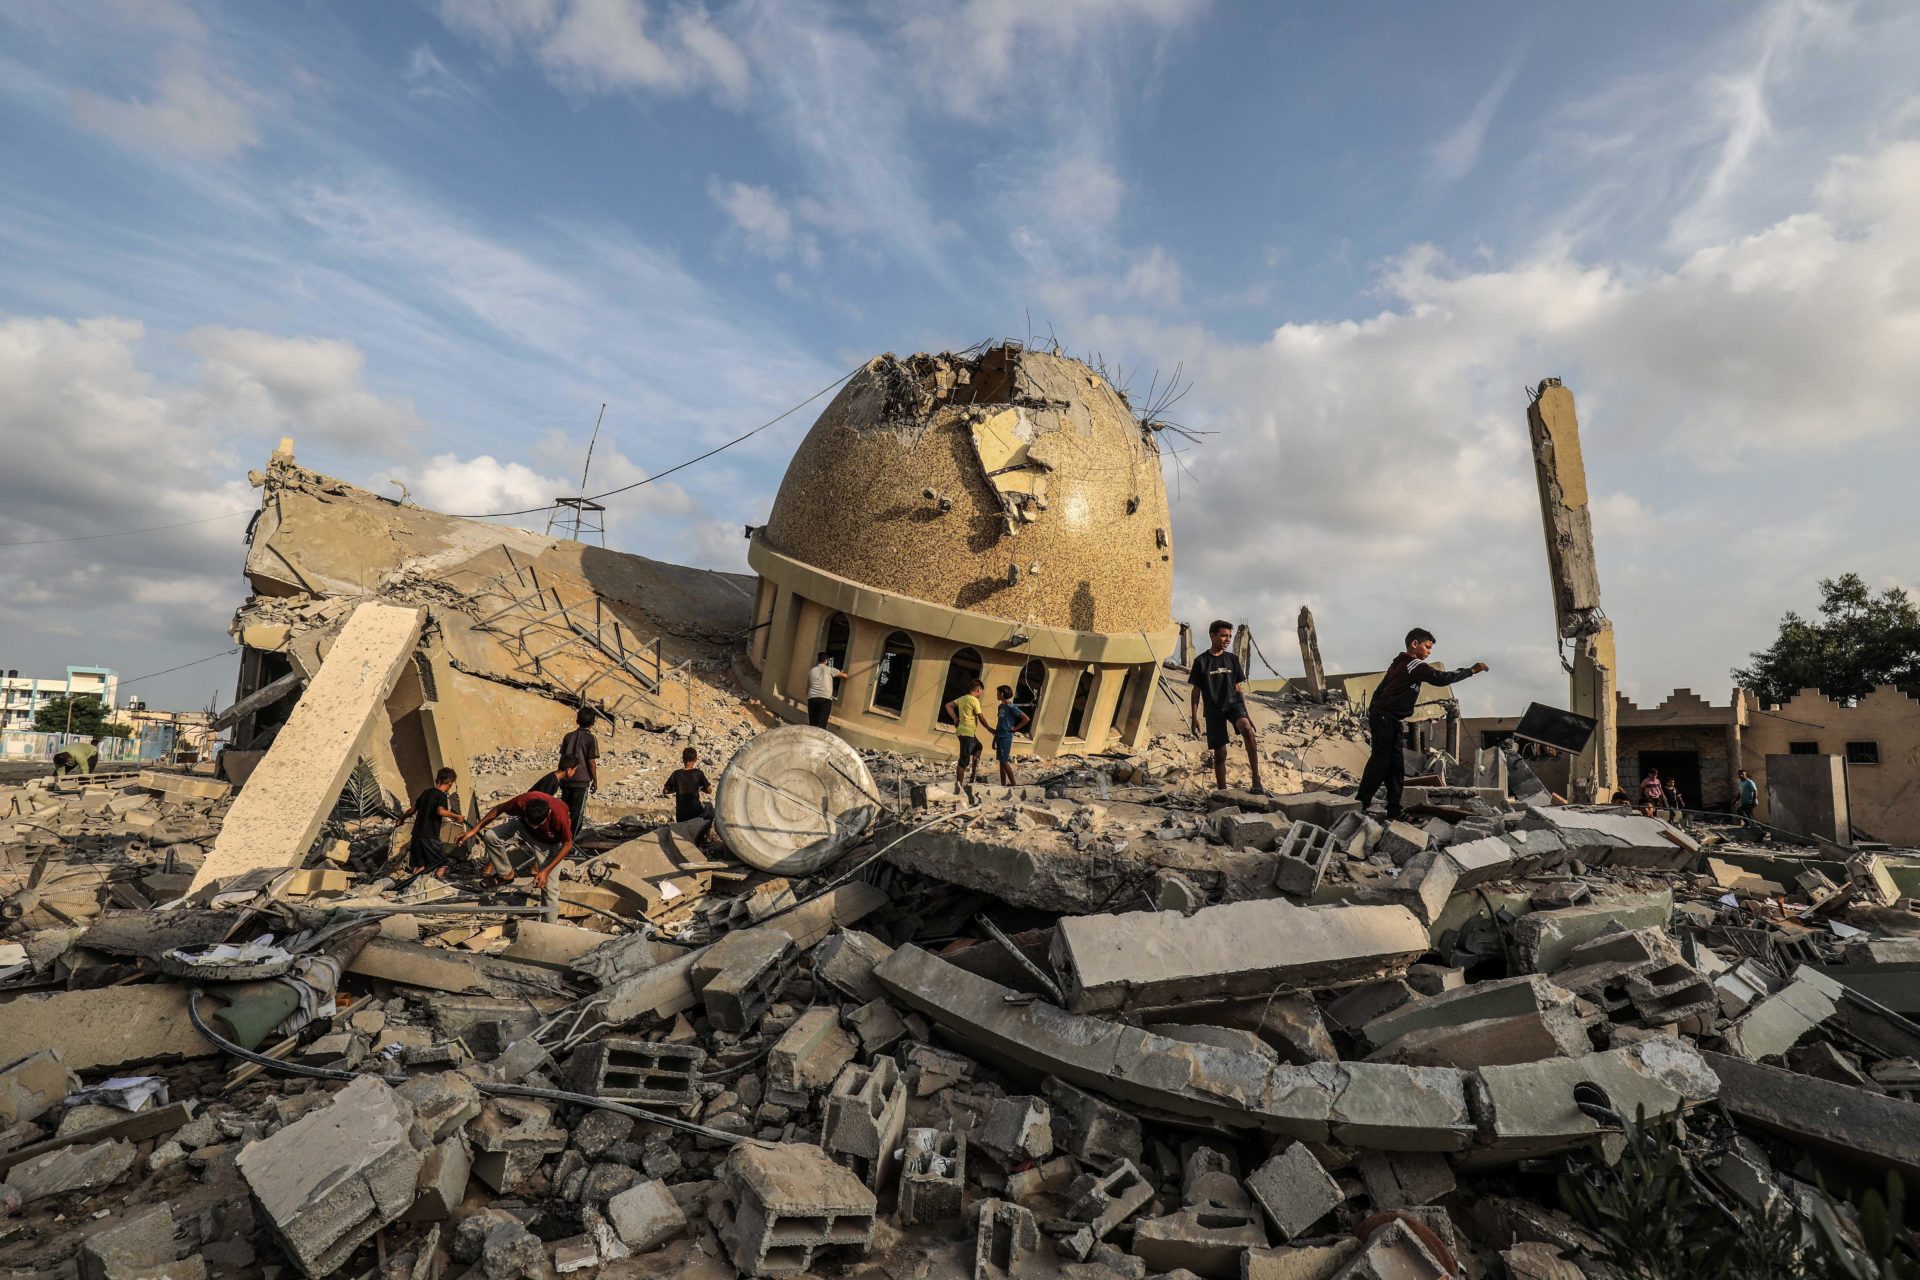 Palestinians inspect the ruins of a destroyed mosque in the city of Khan Yunis, south of the Gaza Strip, following an Israeli airstrike